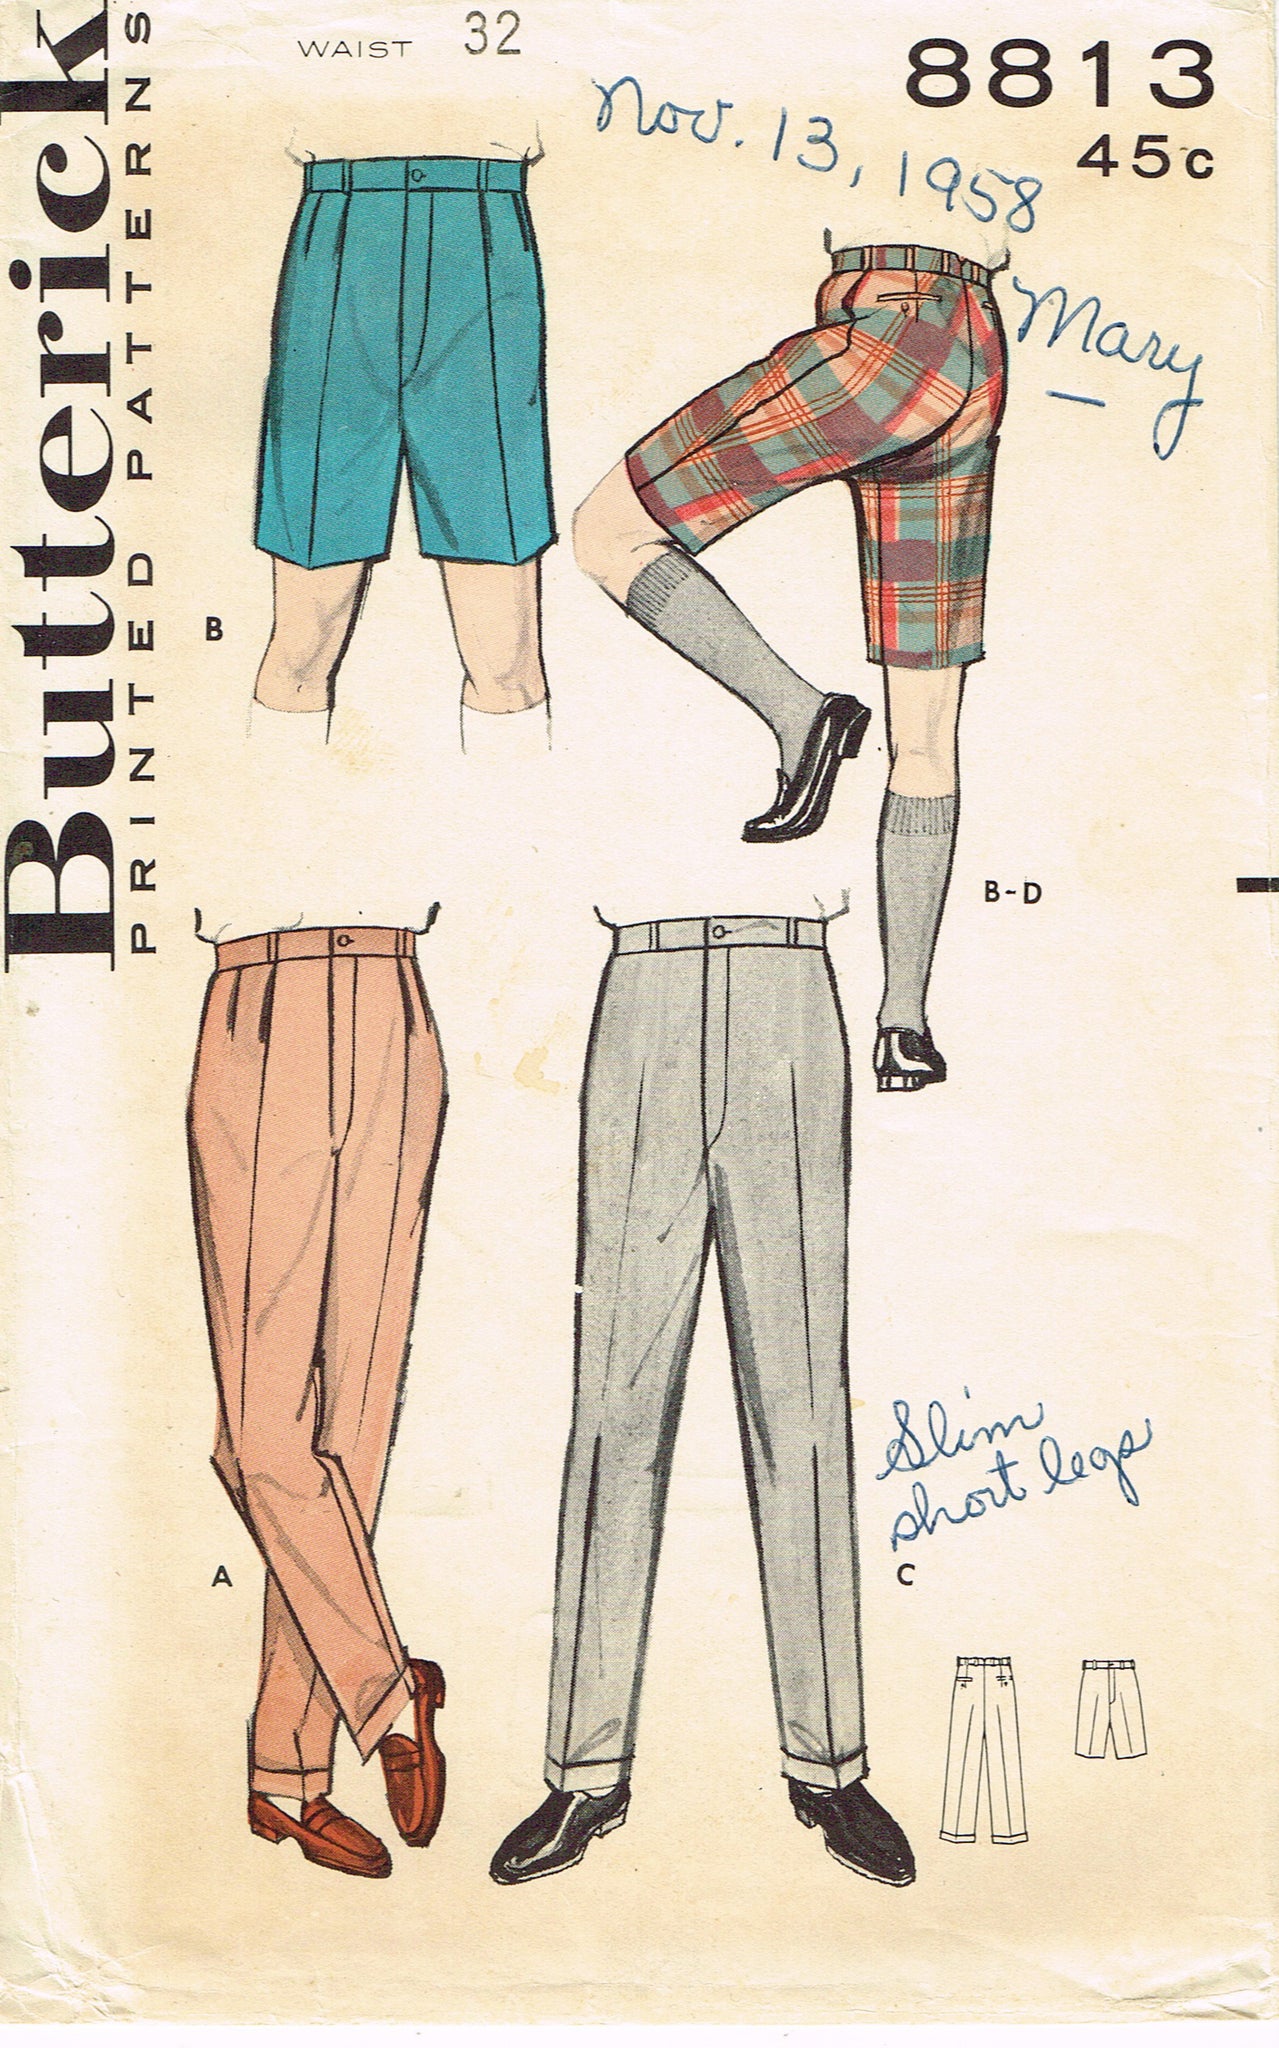 Index of /wp-content/gallery/1950s-mens-fashion-ads